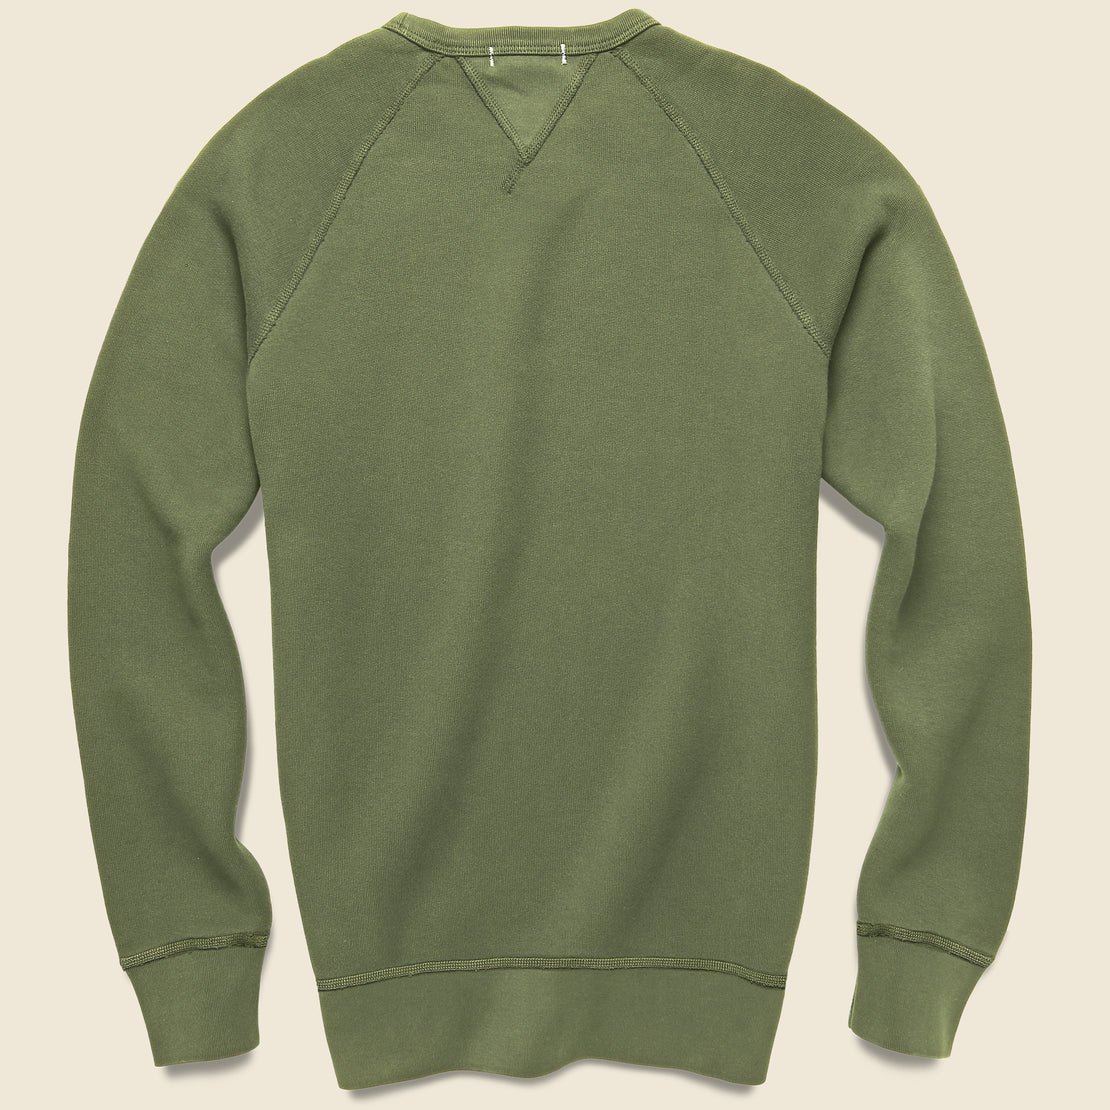 French Terry Sweatshirt - Faded Olive